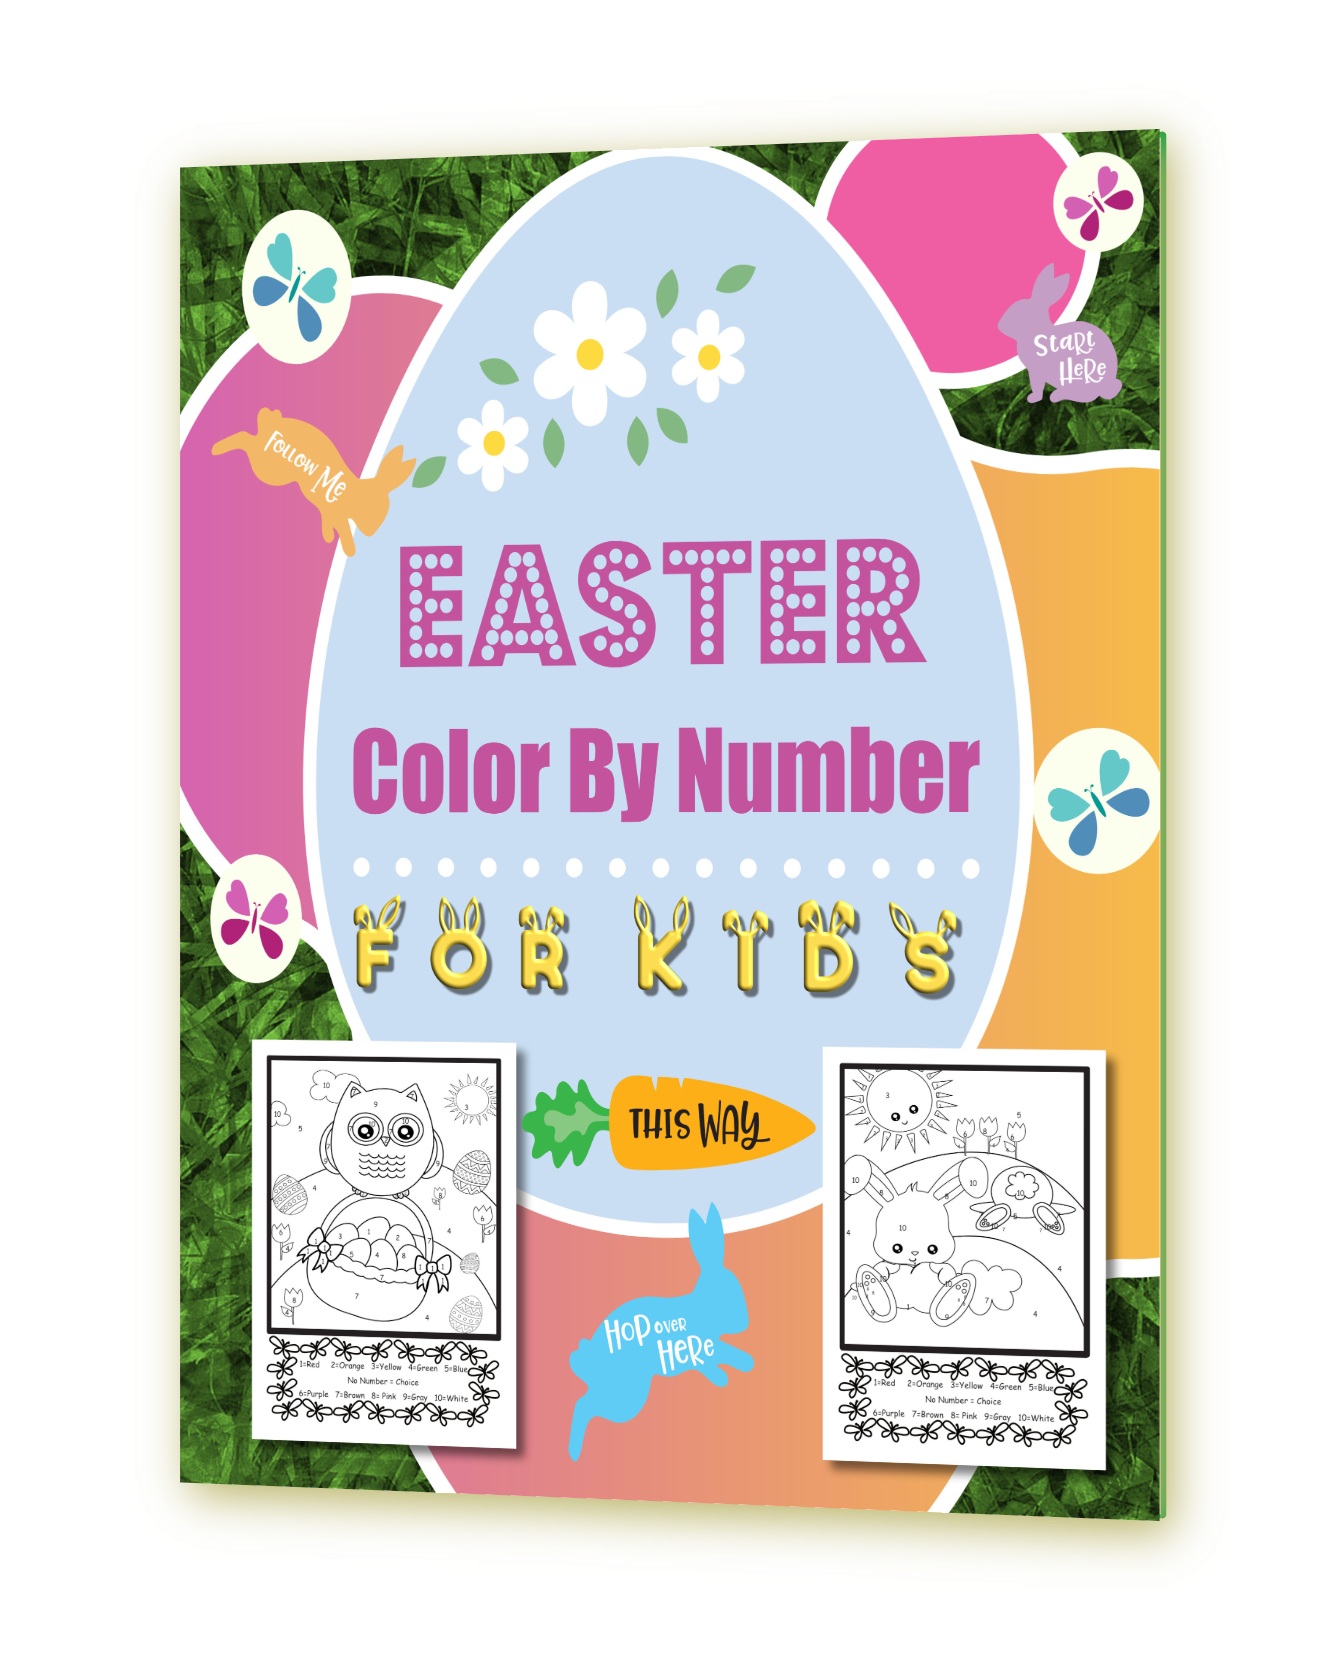 Easter Color By Number